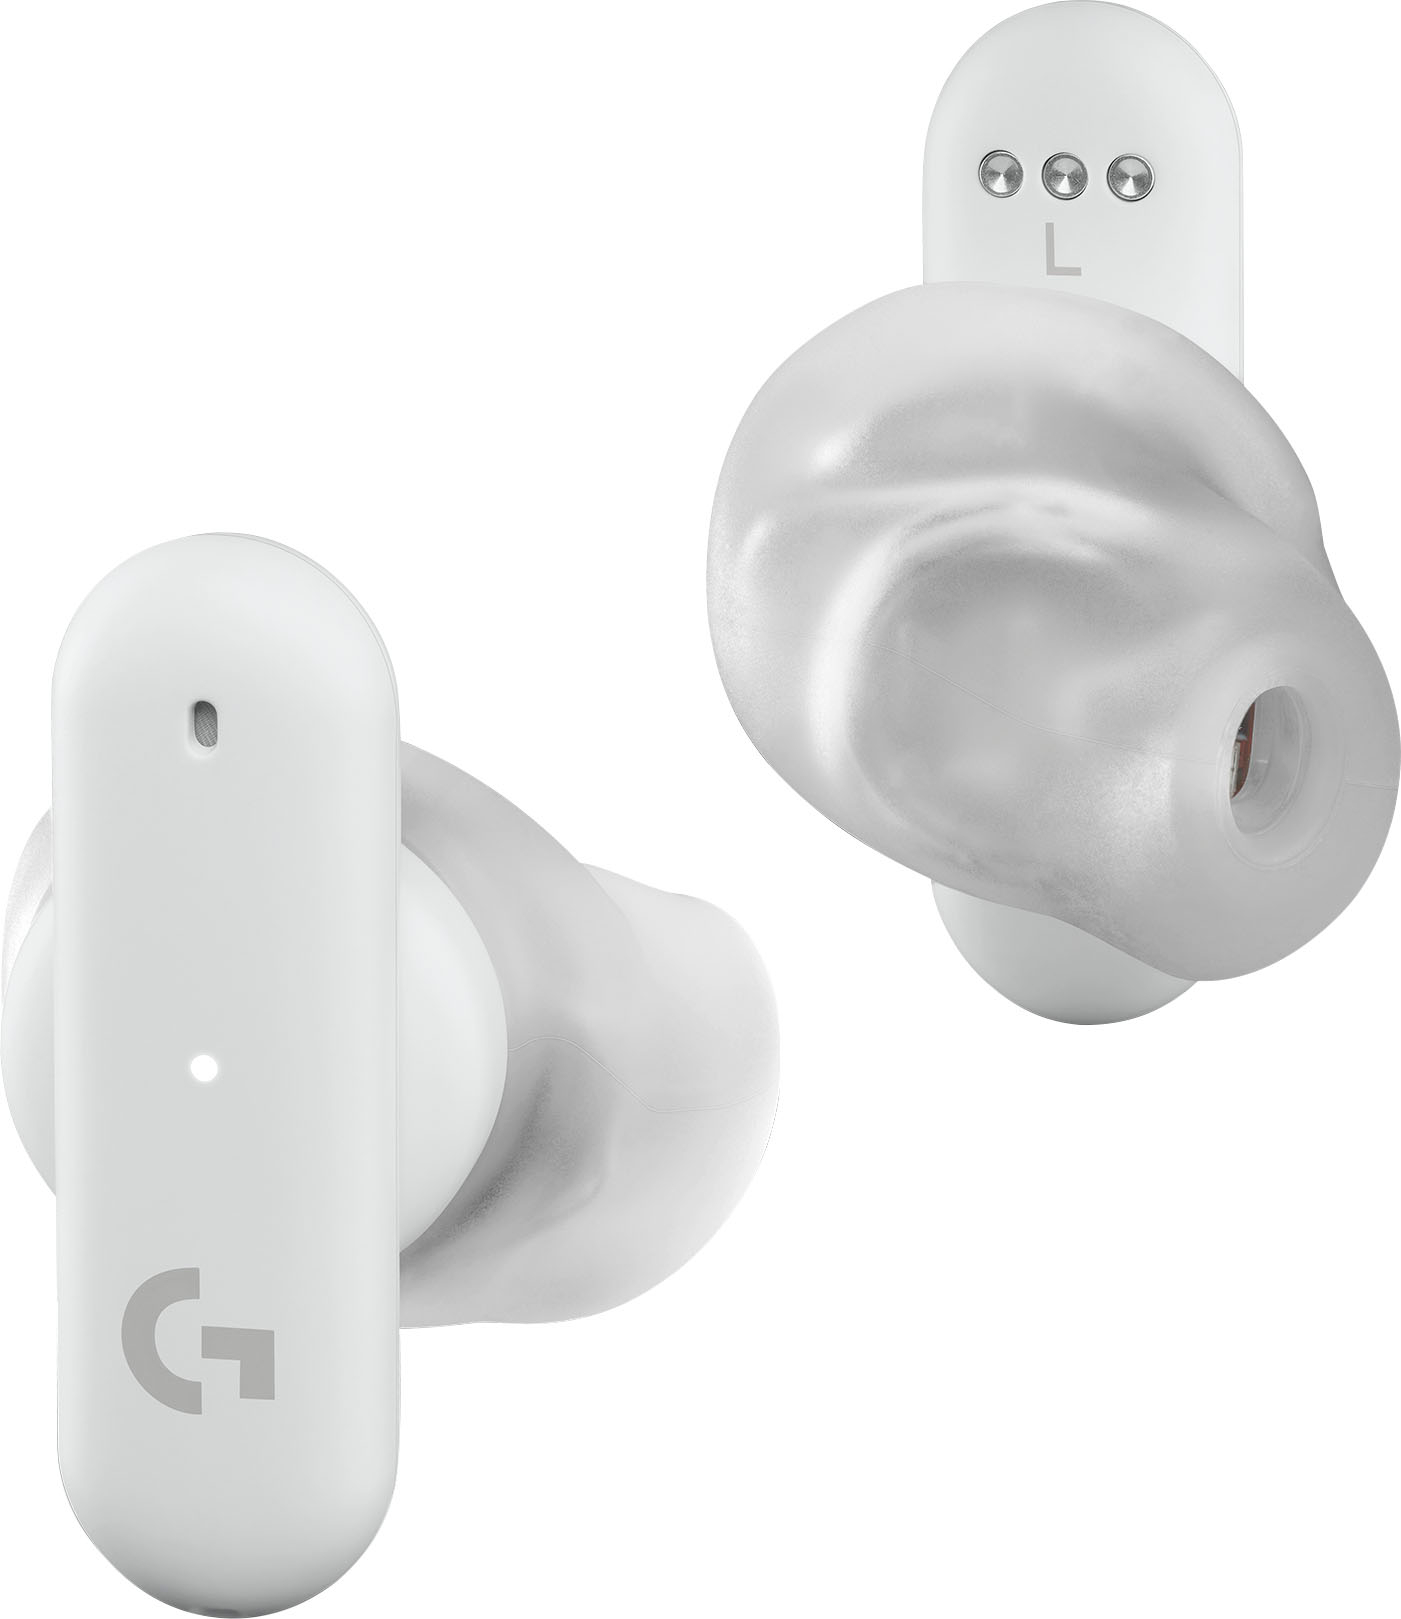 Logitech FITS True Wireless Gaming Earbuds for PC, Mac, PS5, PS4